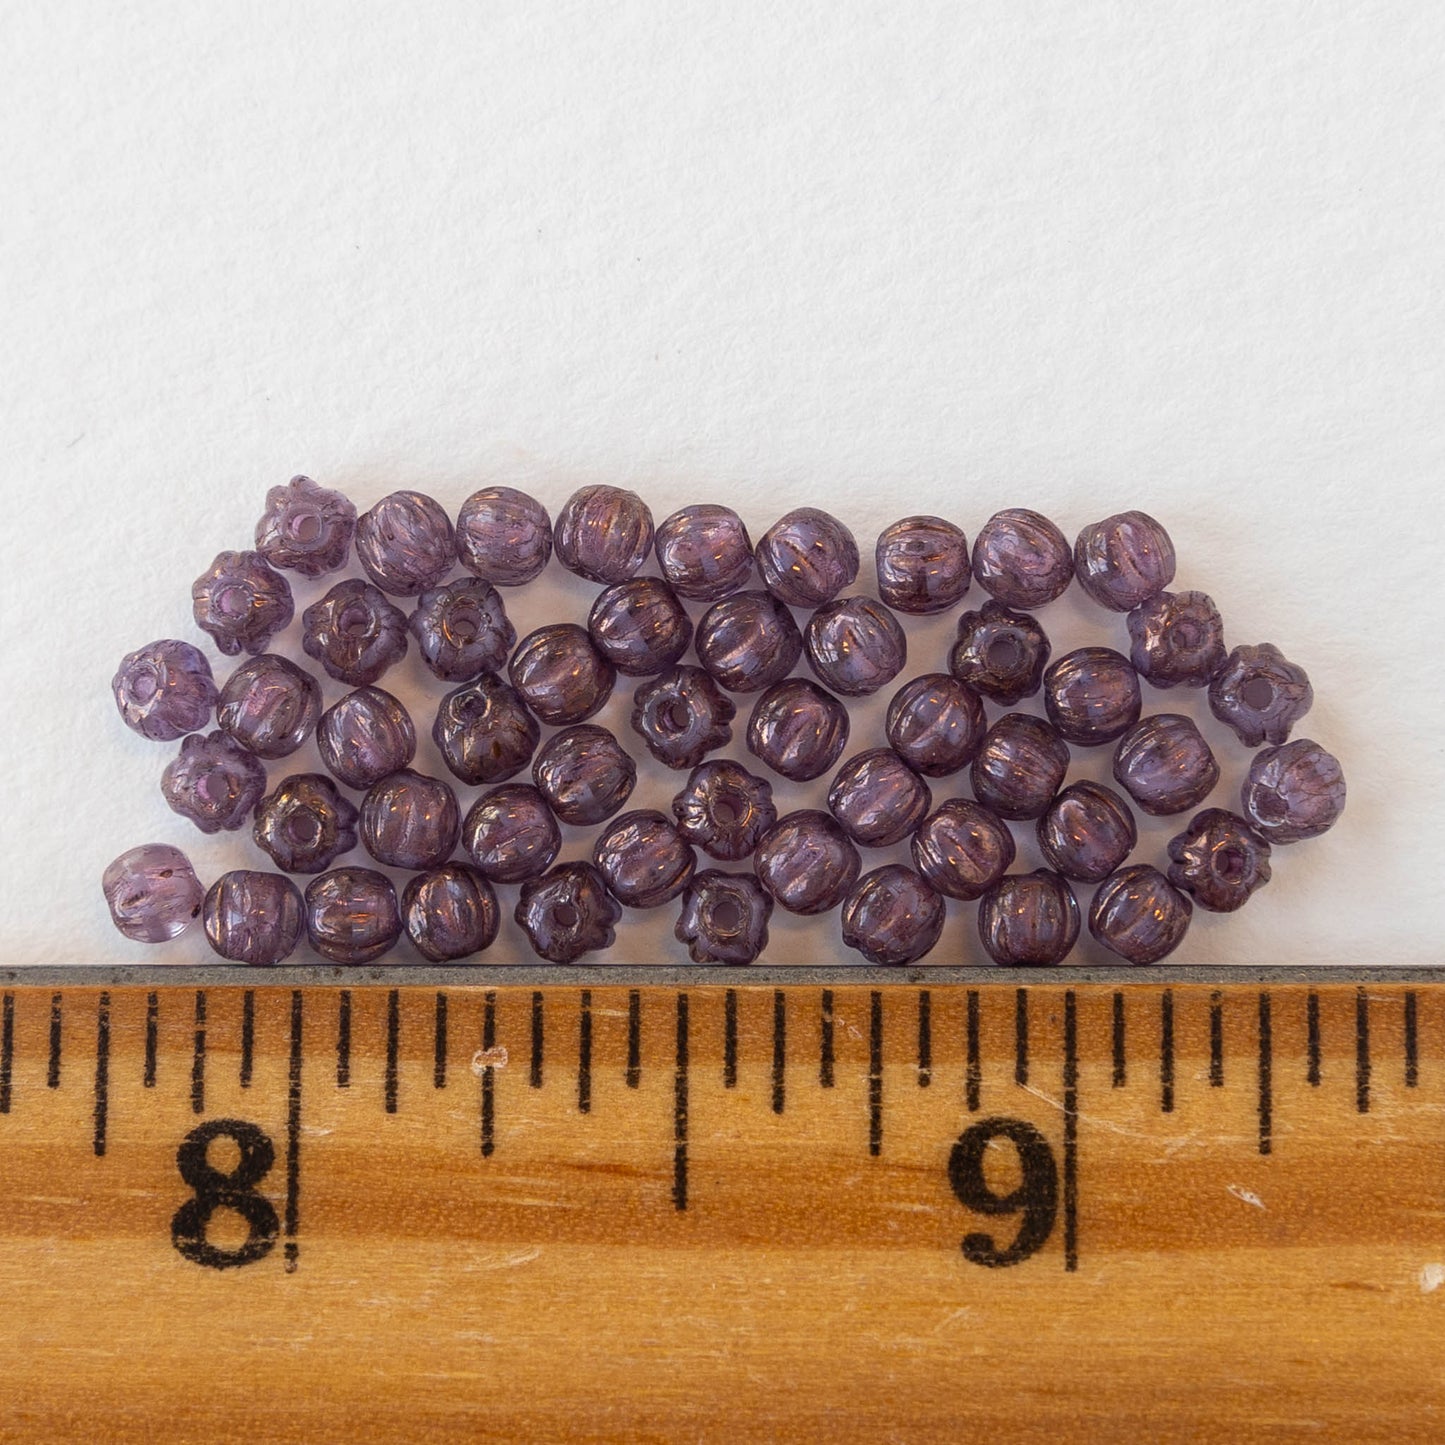 3mm Melon Bead - Violet with Gold Wash - 50 Beads